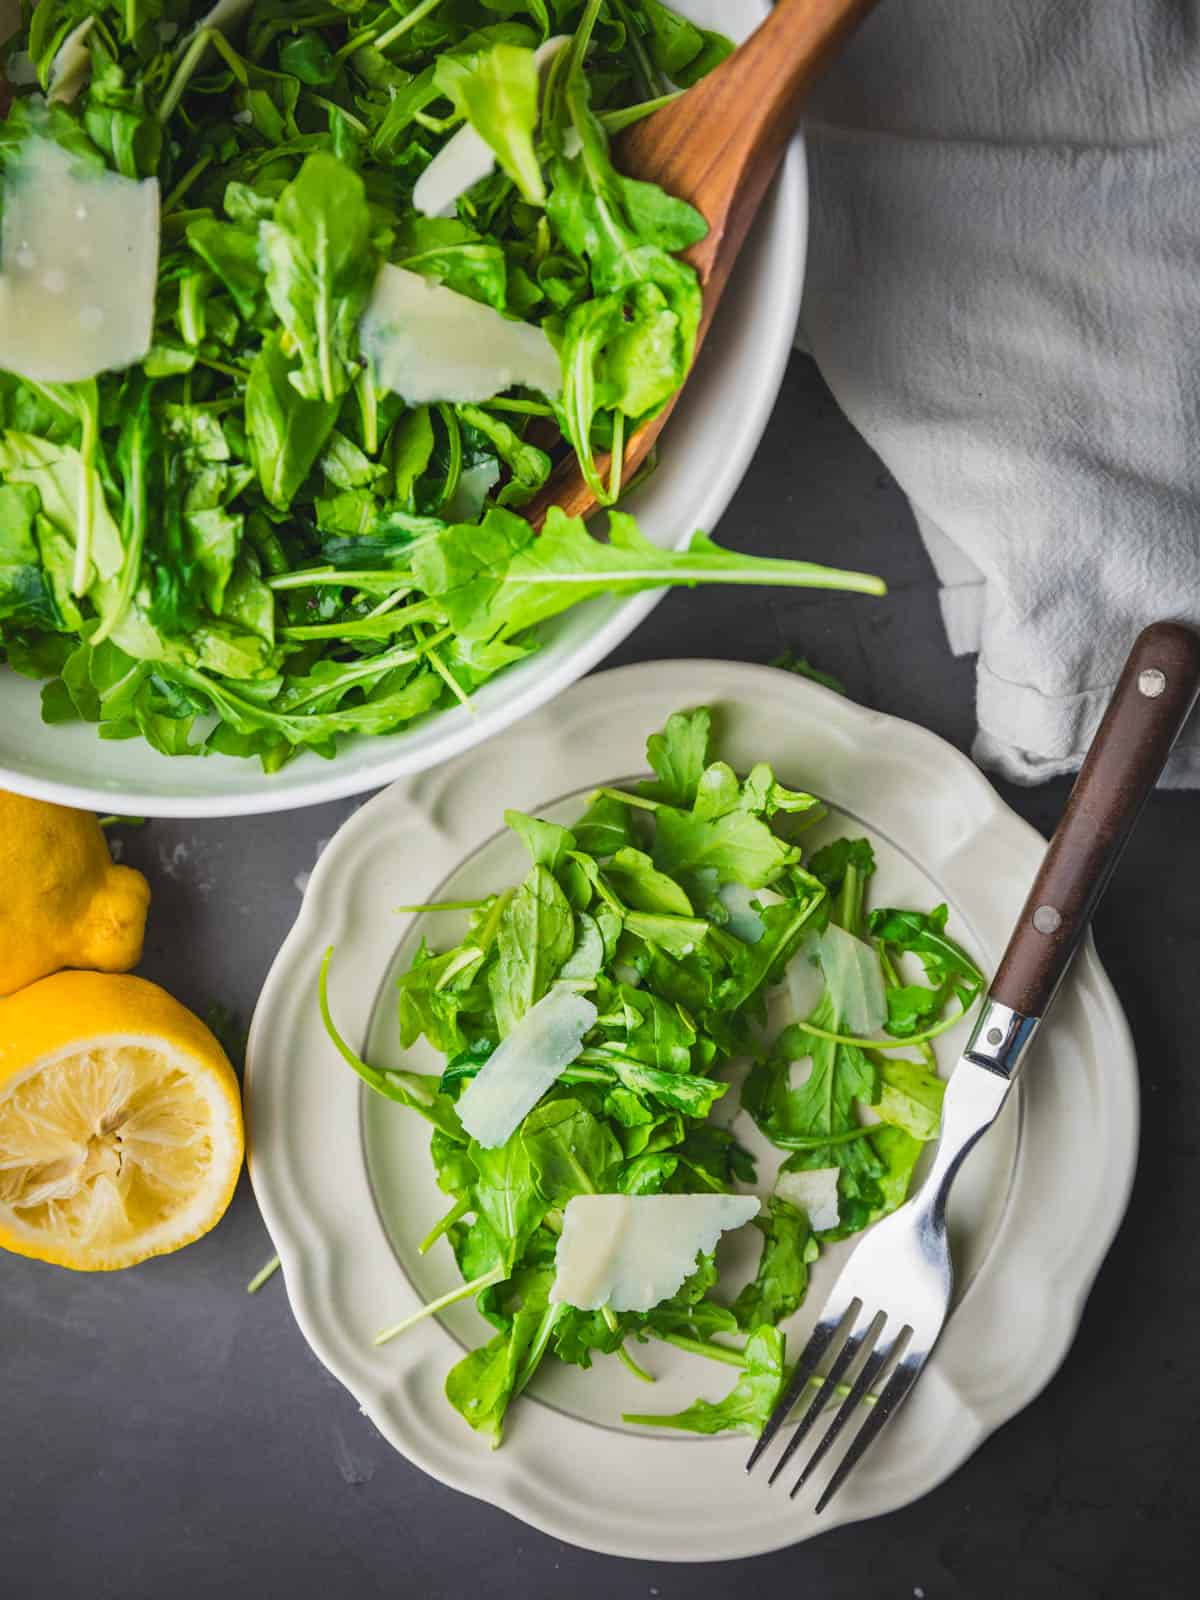 arugula parmesan salad in bowl and on plate with fork next to cut lemon.